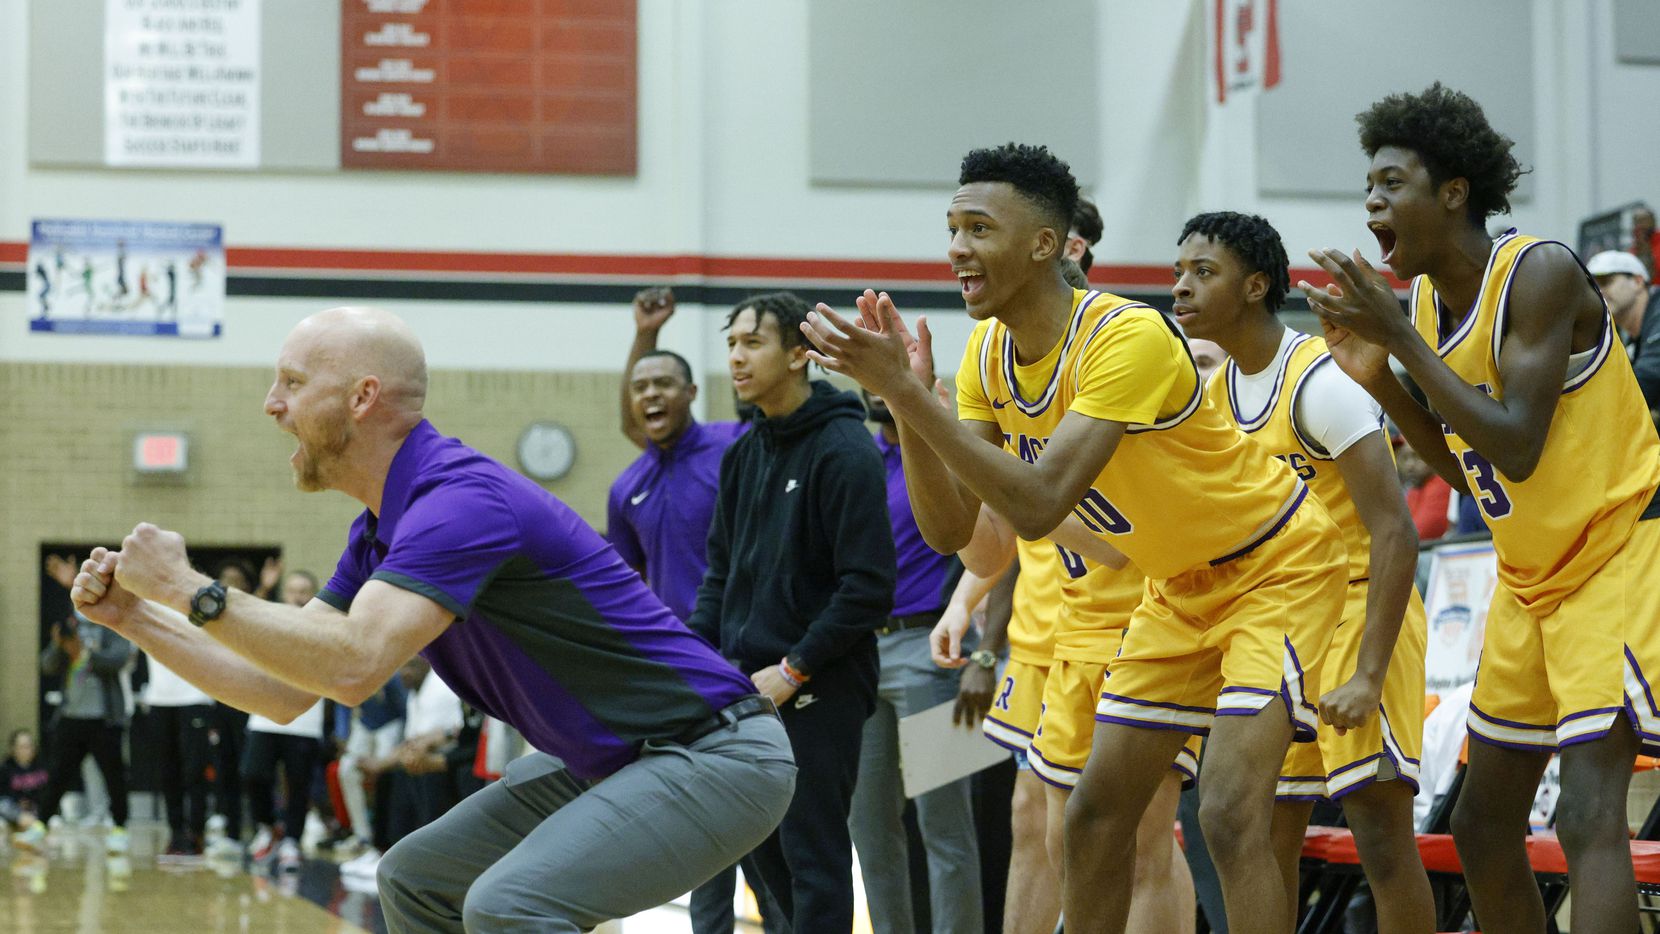 Richardson head coach Kevin Lawson reacts with the team after a basket during the fourth quarter of the Whataburger boys basketball tournament championship game against Duncanville at Mansfield Legacy High School in Mansfield, Texas on Thursday, Dec. 30, 2021. Richardson defeated Duncanville 60-58.